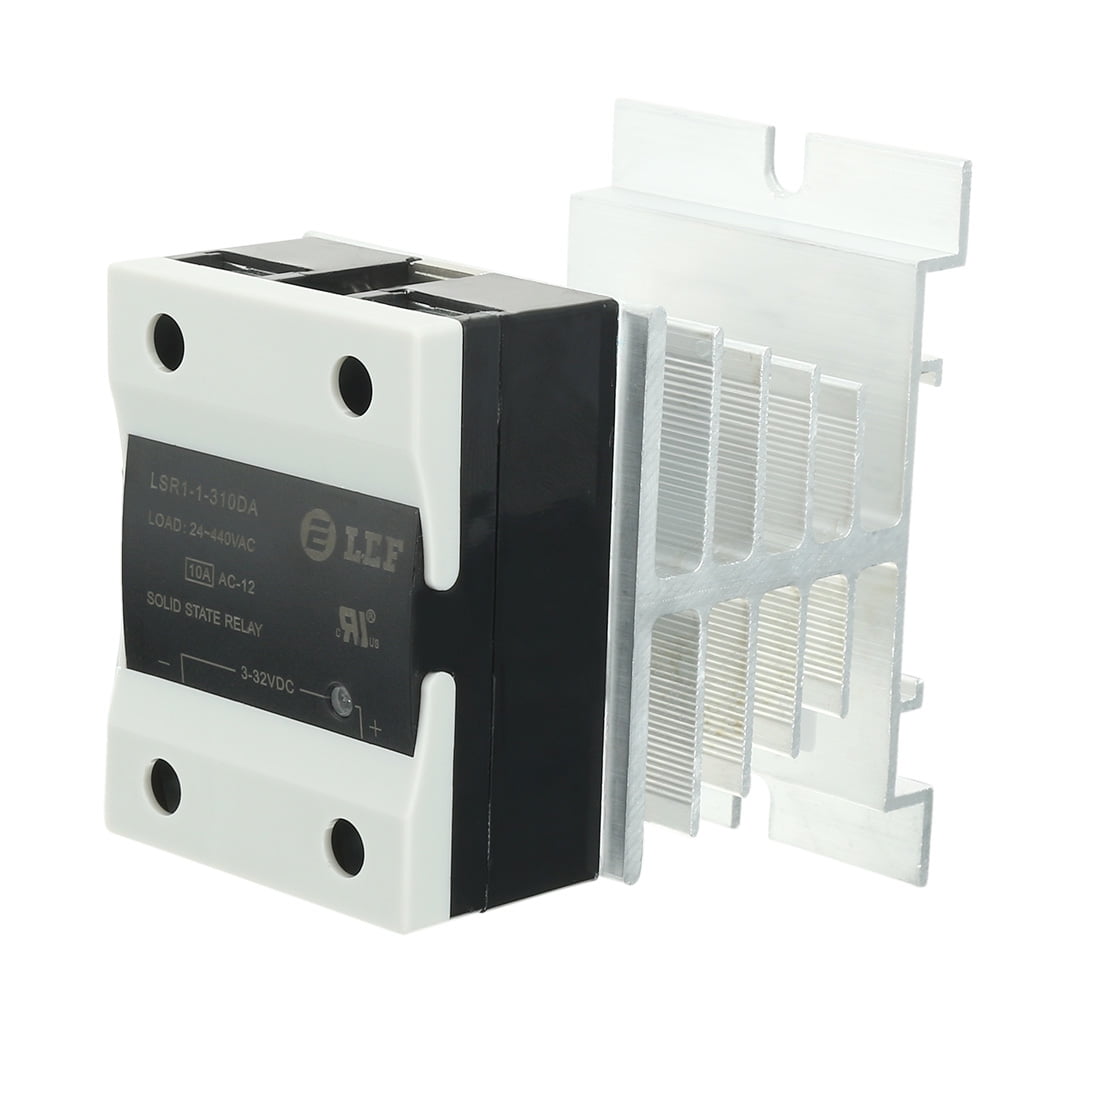 2x Aluminum Heat Sink Solid State Relay SSR Small Type Heat Dissipation 10A-40A 